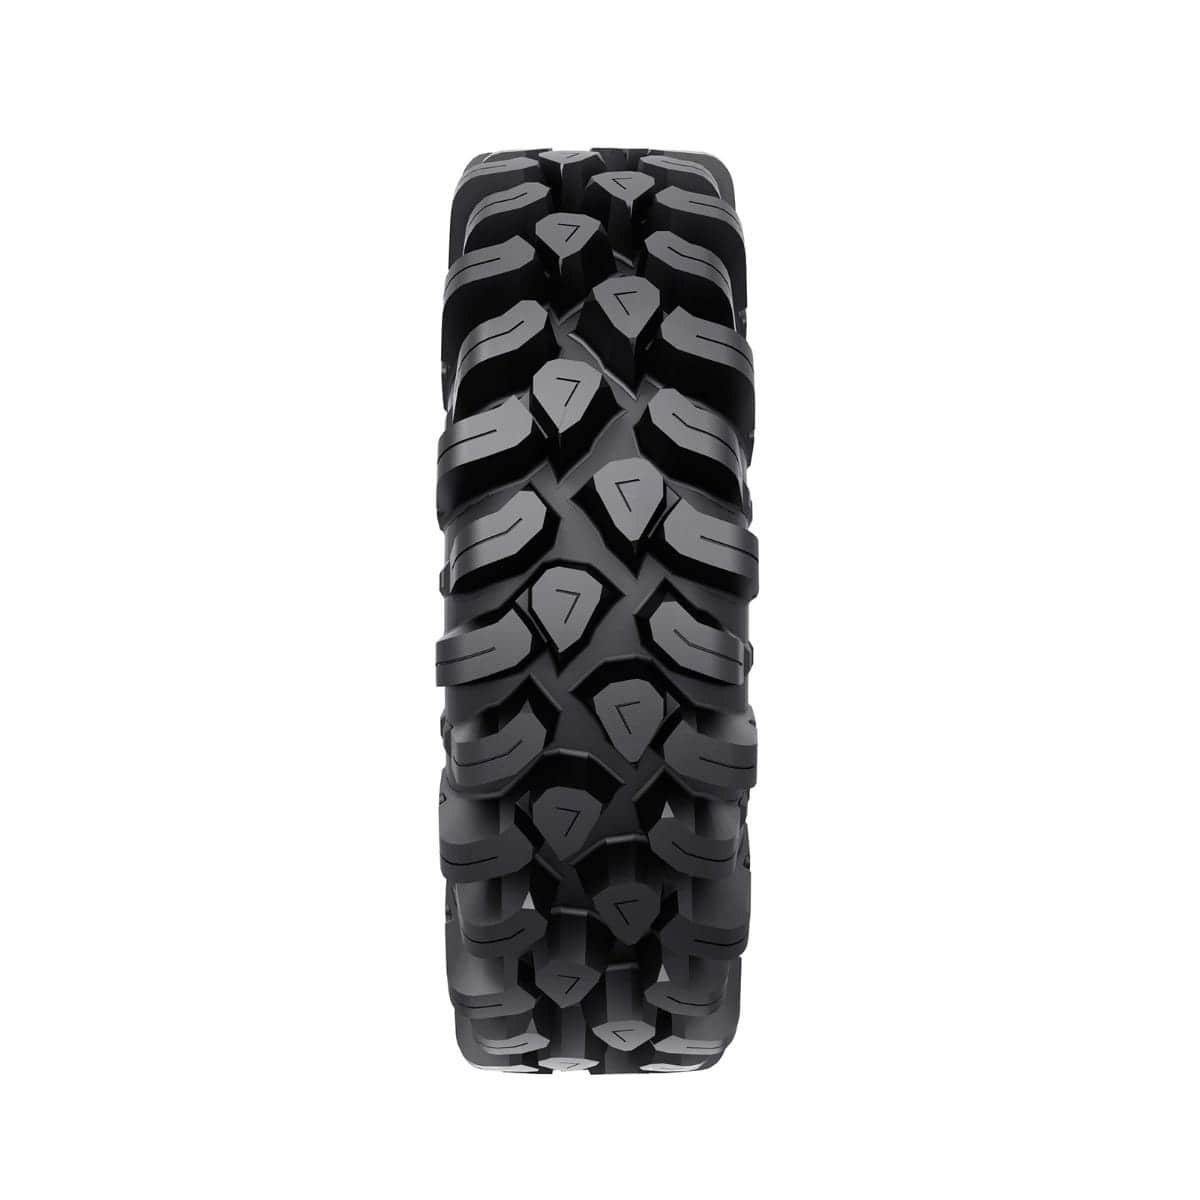 XPS Swamp Force Tire